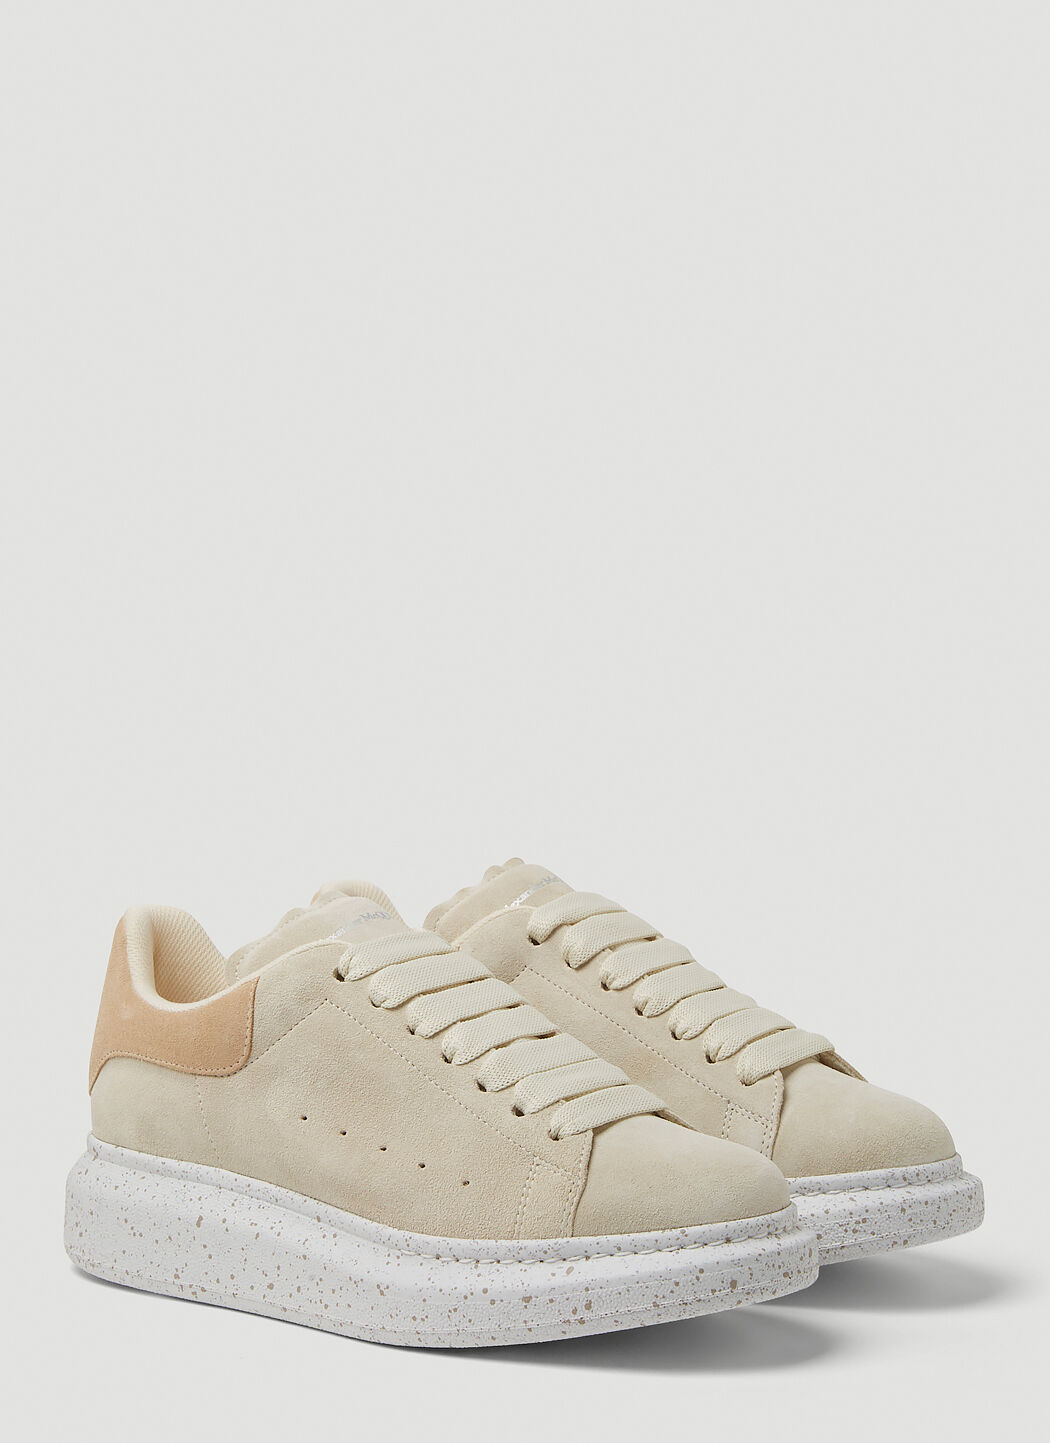 Buy Ether Women Beige Perforated Sneakers - Casual Shoes for Women 7717789  | Myntra